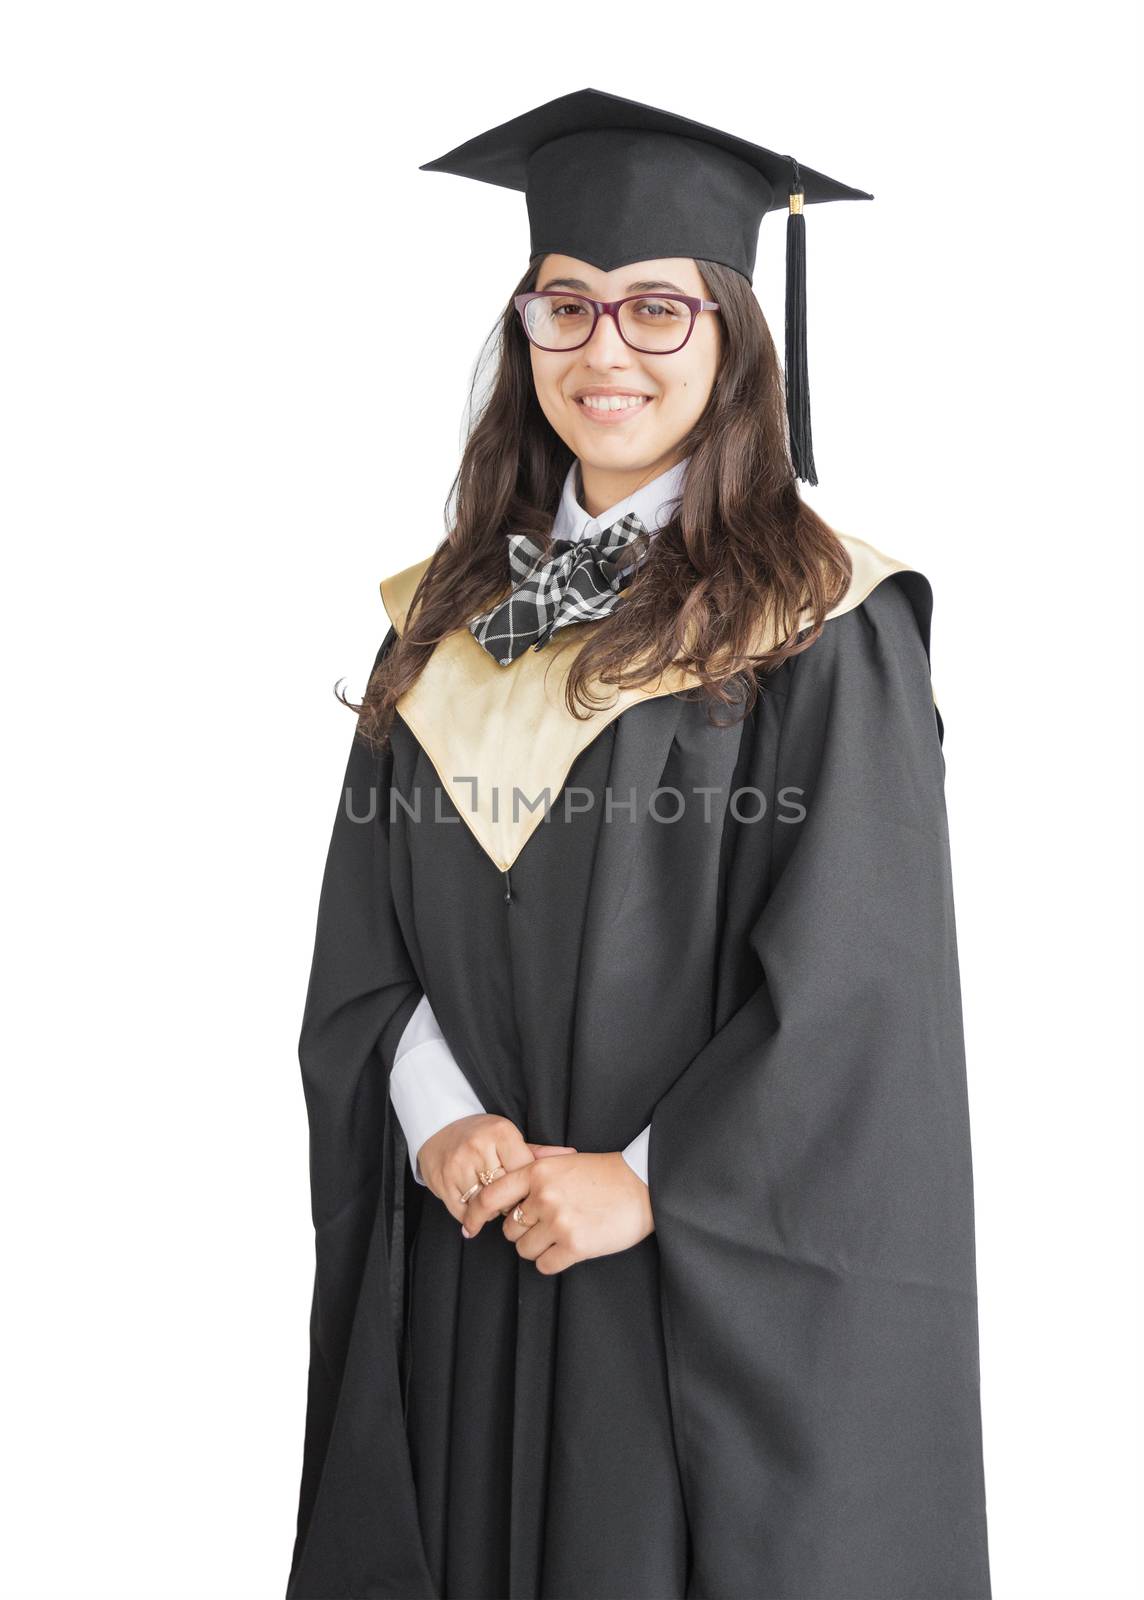 Young girl graduate of the University with eyeglasses, academic cap and black gown, standing isolated on white background